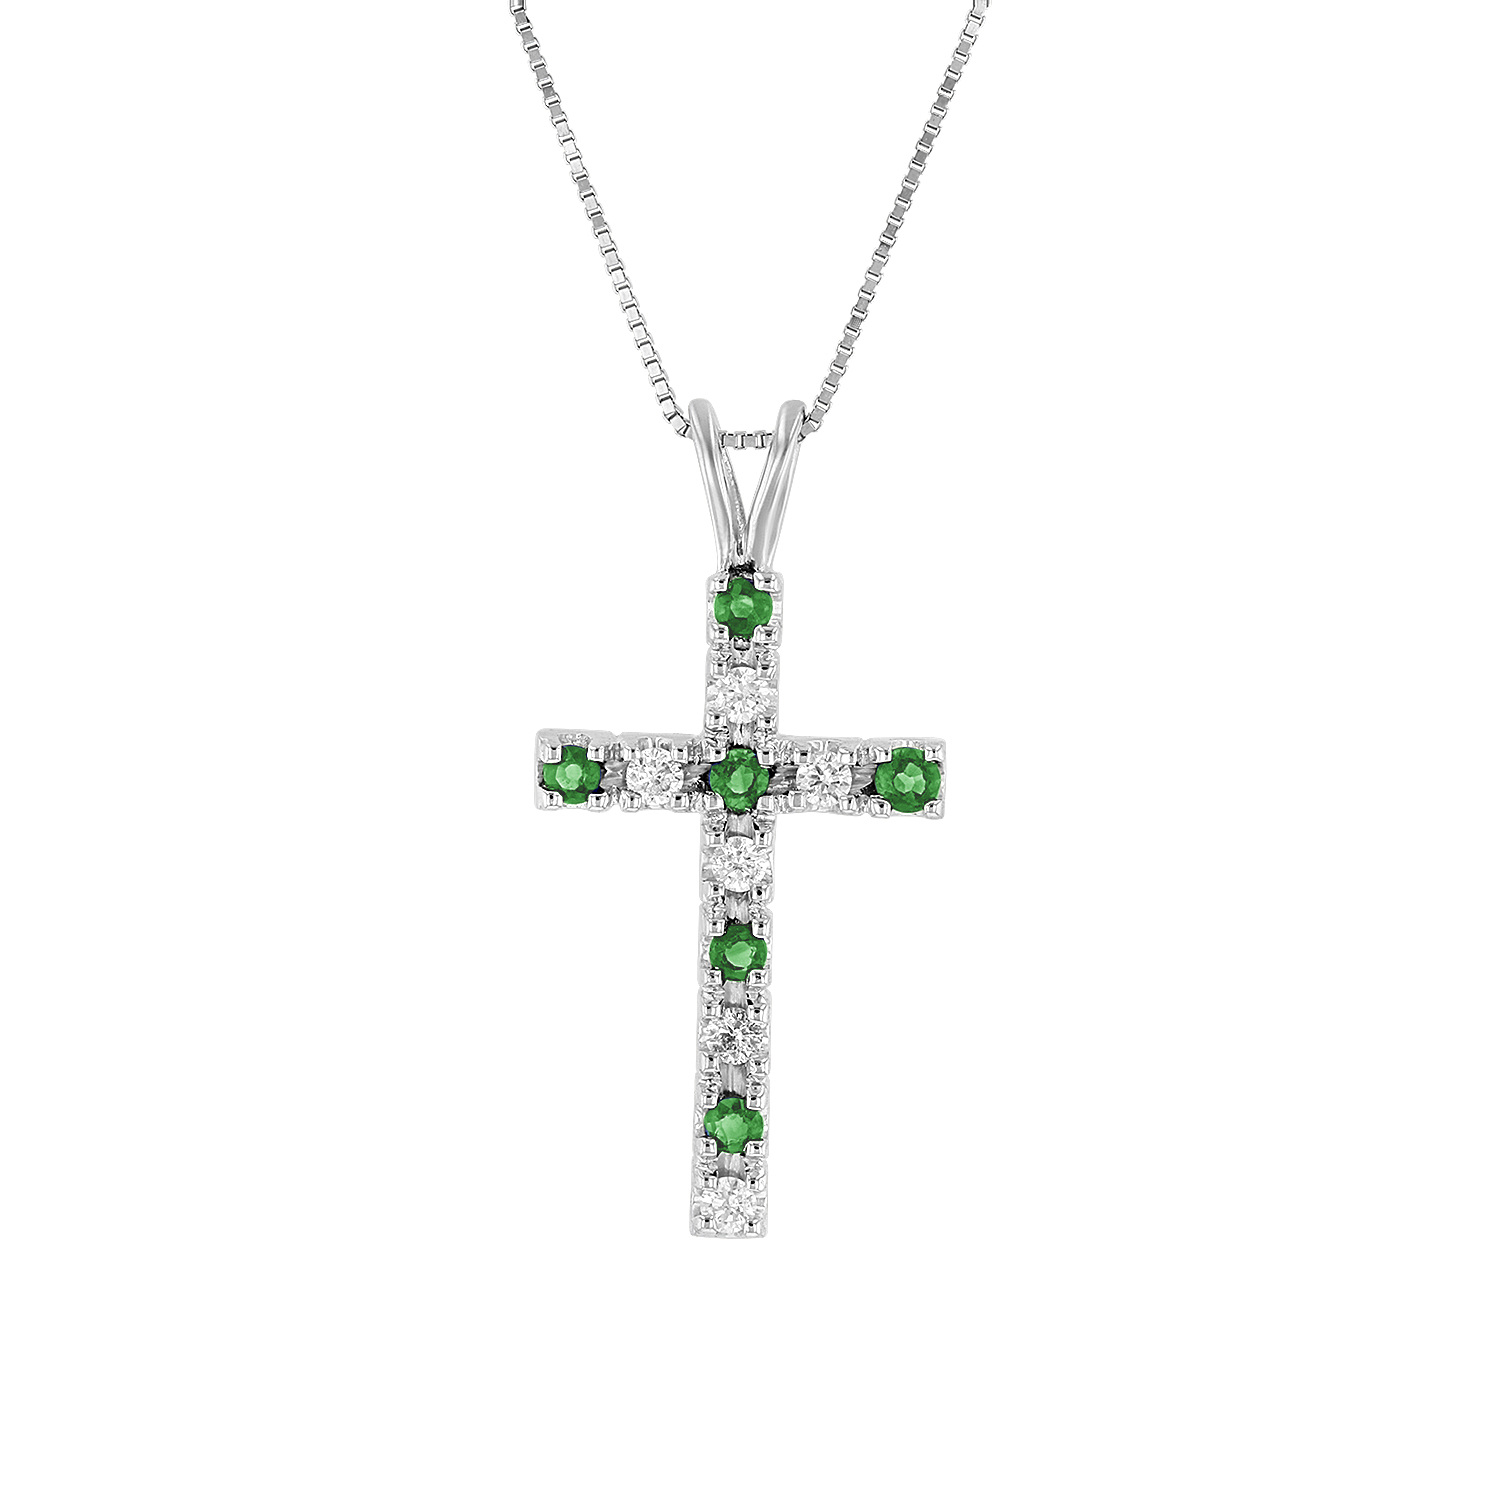 View 0.40ctw Diamond and Emerald Cross Pendant in 14k White Gold